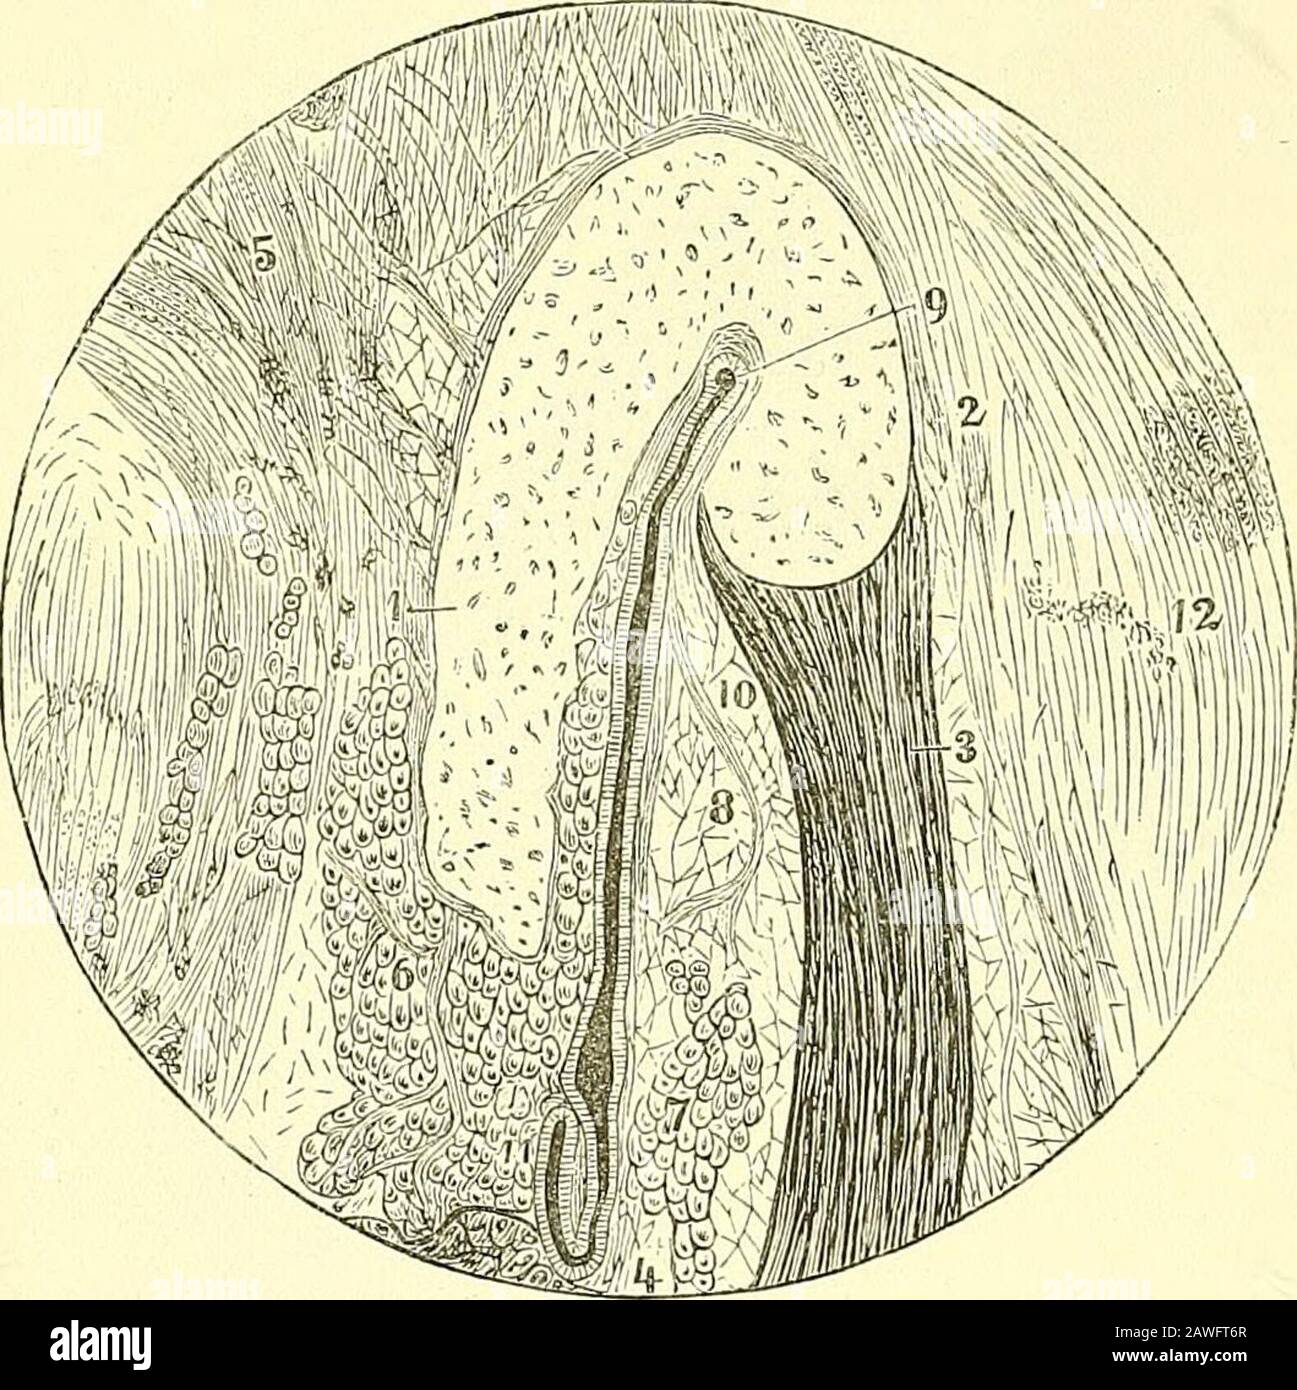 Quain's elements of anatomy . rger(fig. 375, i¥), and several smaller openings, which lead into irregularcavities, the mastoid cells, in the substance of the mastoid portion of thetemporal bone. These cells communicate for the most part freely withone another, and are lined by a thin mucous membrane continuous with 438 THE EAE. that of the tympanum. Behind the fenestra ovalis, and directed upwards,is a small conical eminence, called the pyramid., or miinentia jKqjillaris(fig. 374, 375, ^J?/). Its apex is pierced by a foramen, through which thetendon of the stapedius muscle emerges fiom a canal Stock Photo